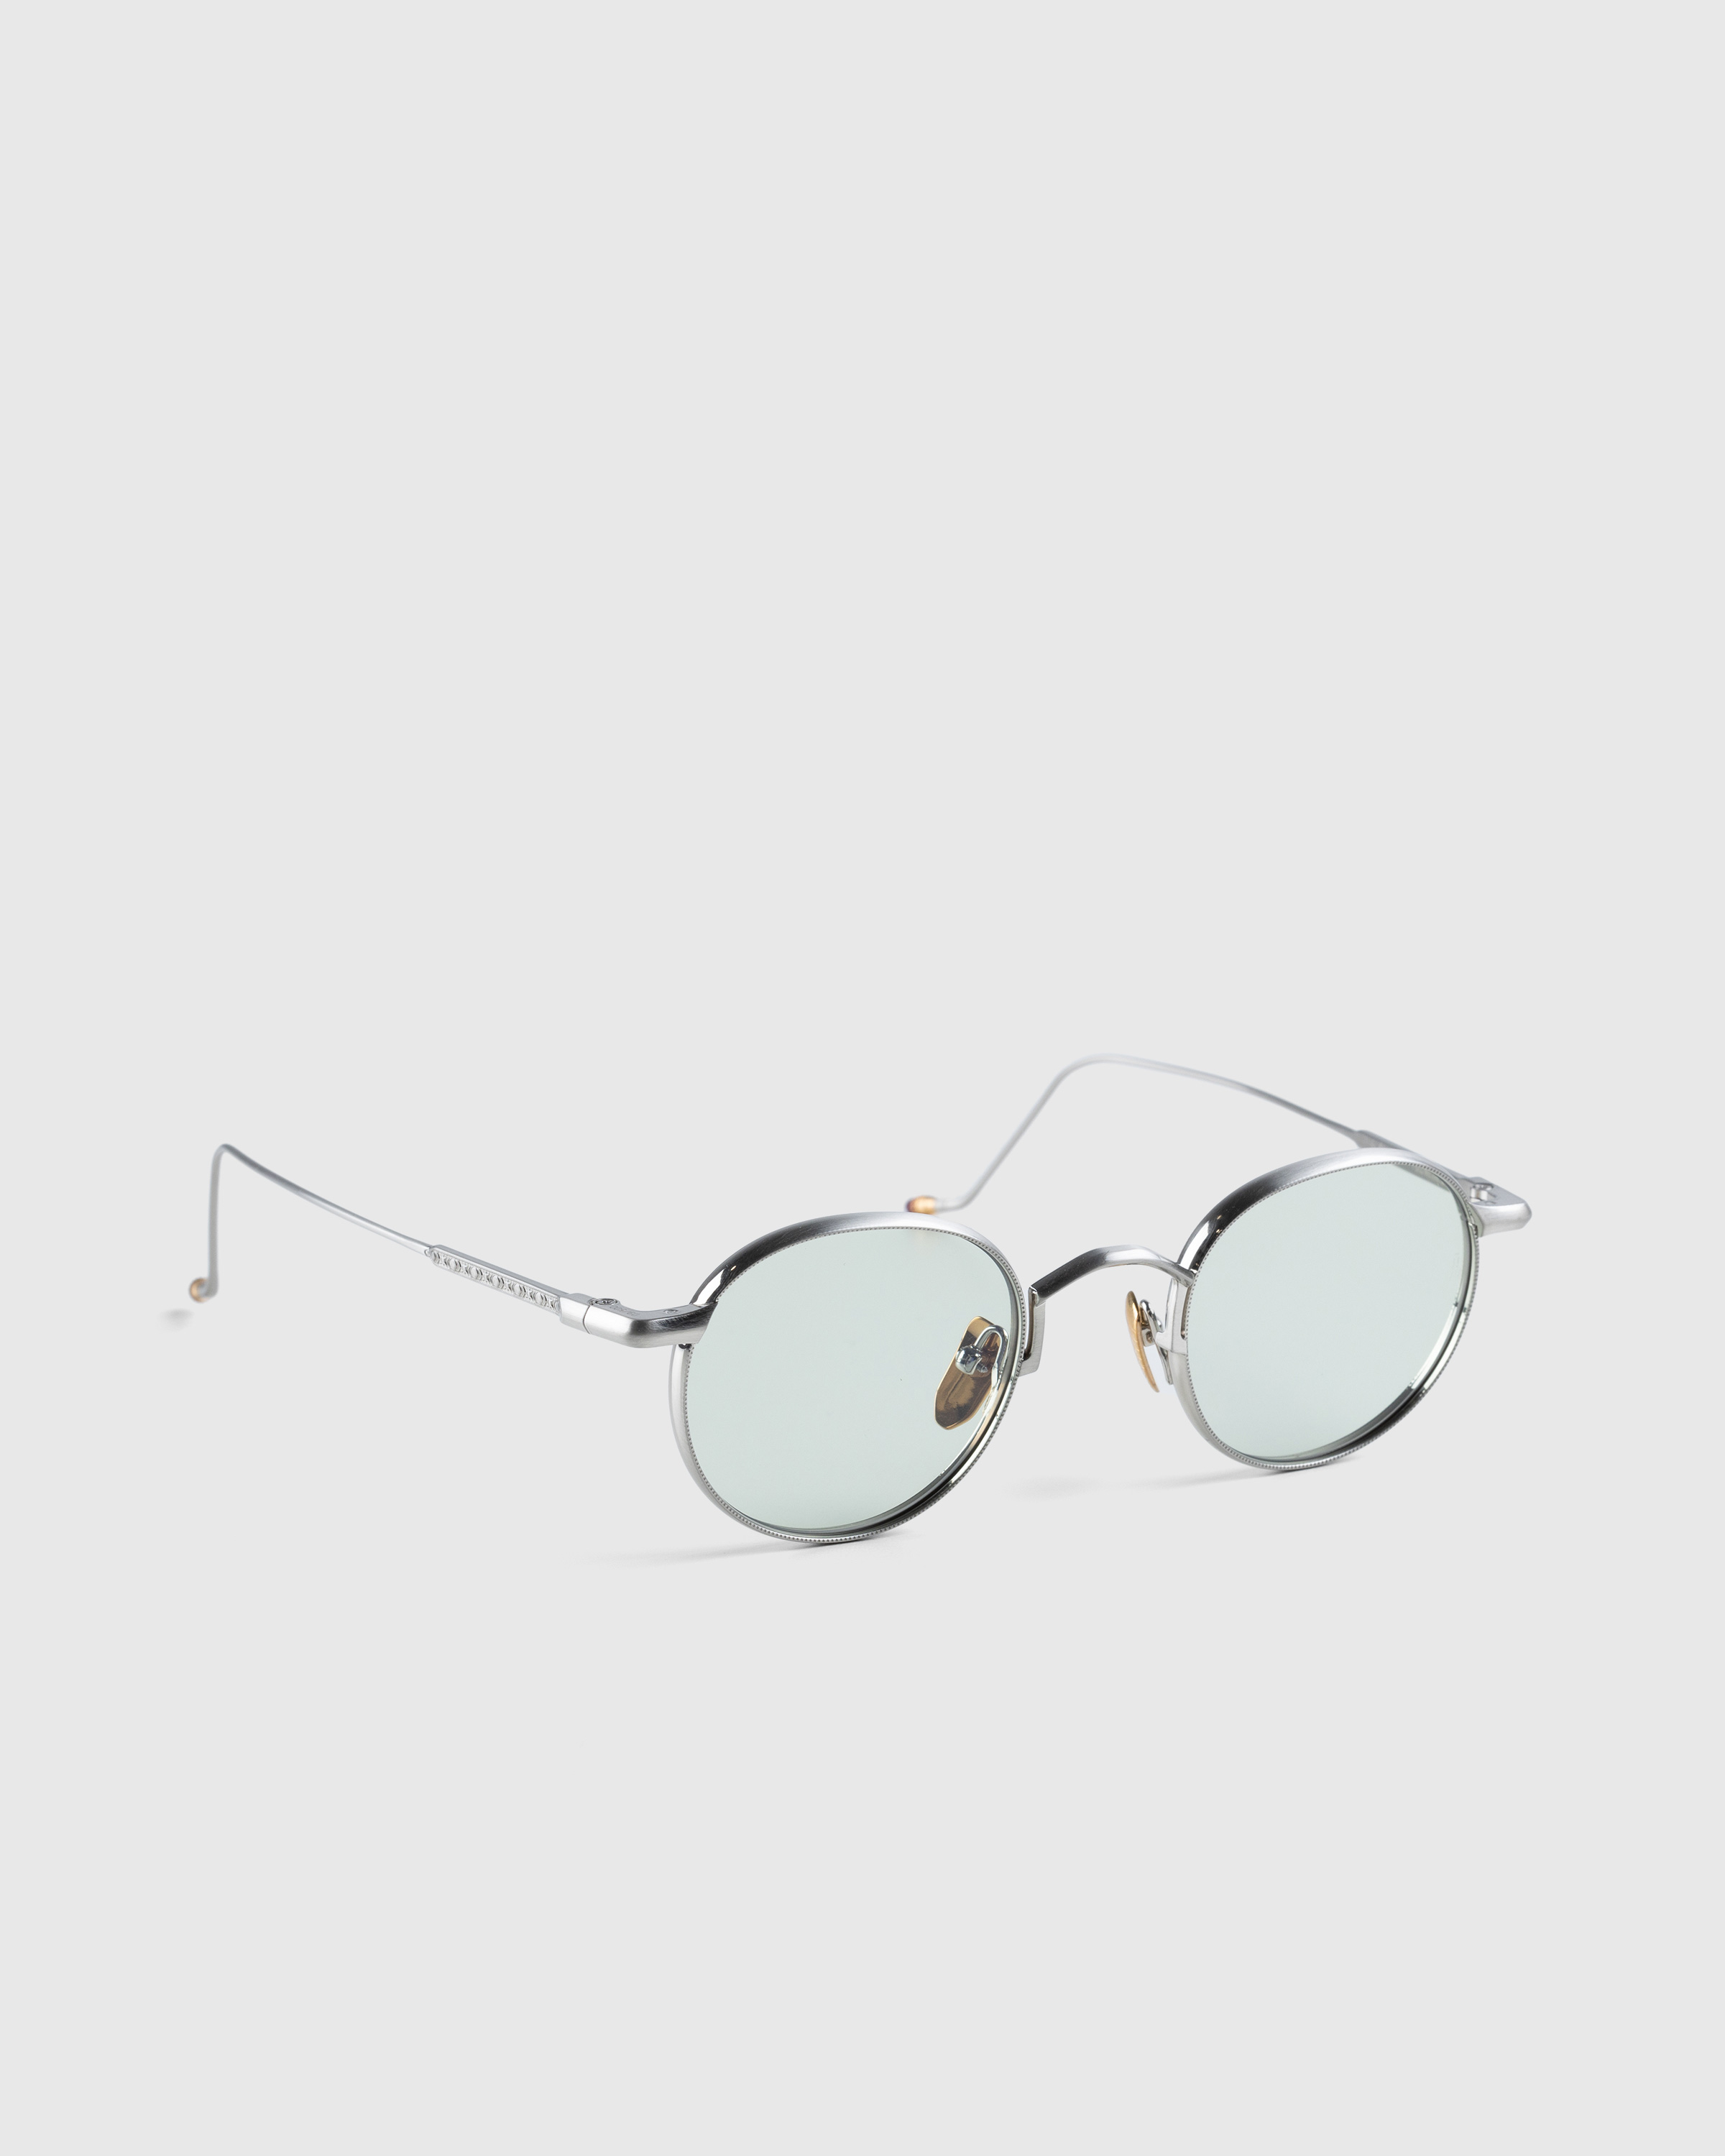 Jacques Marie Mage – Full Metal Jacket Silver - Sunglasses - Silver - Image 3